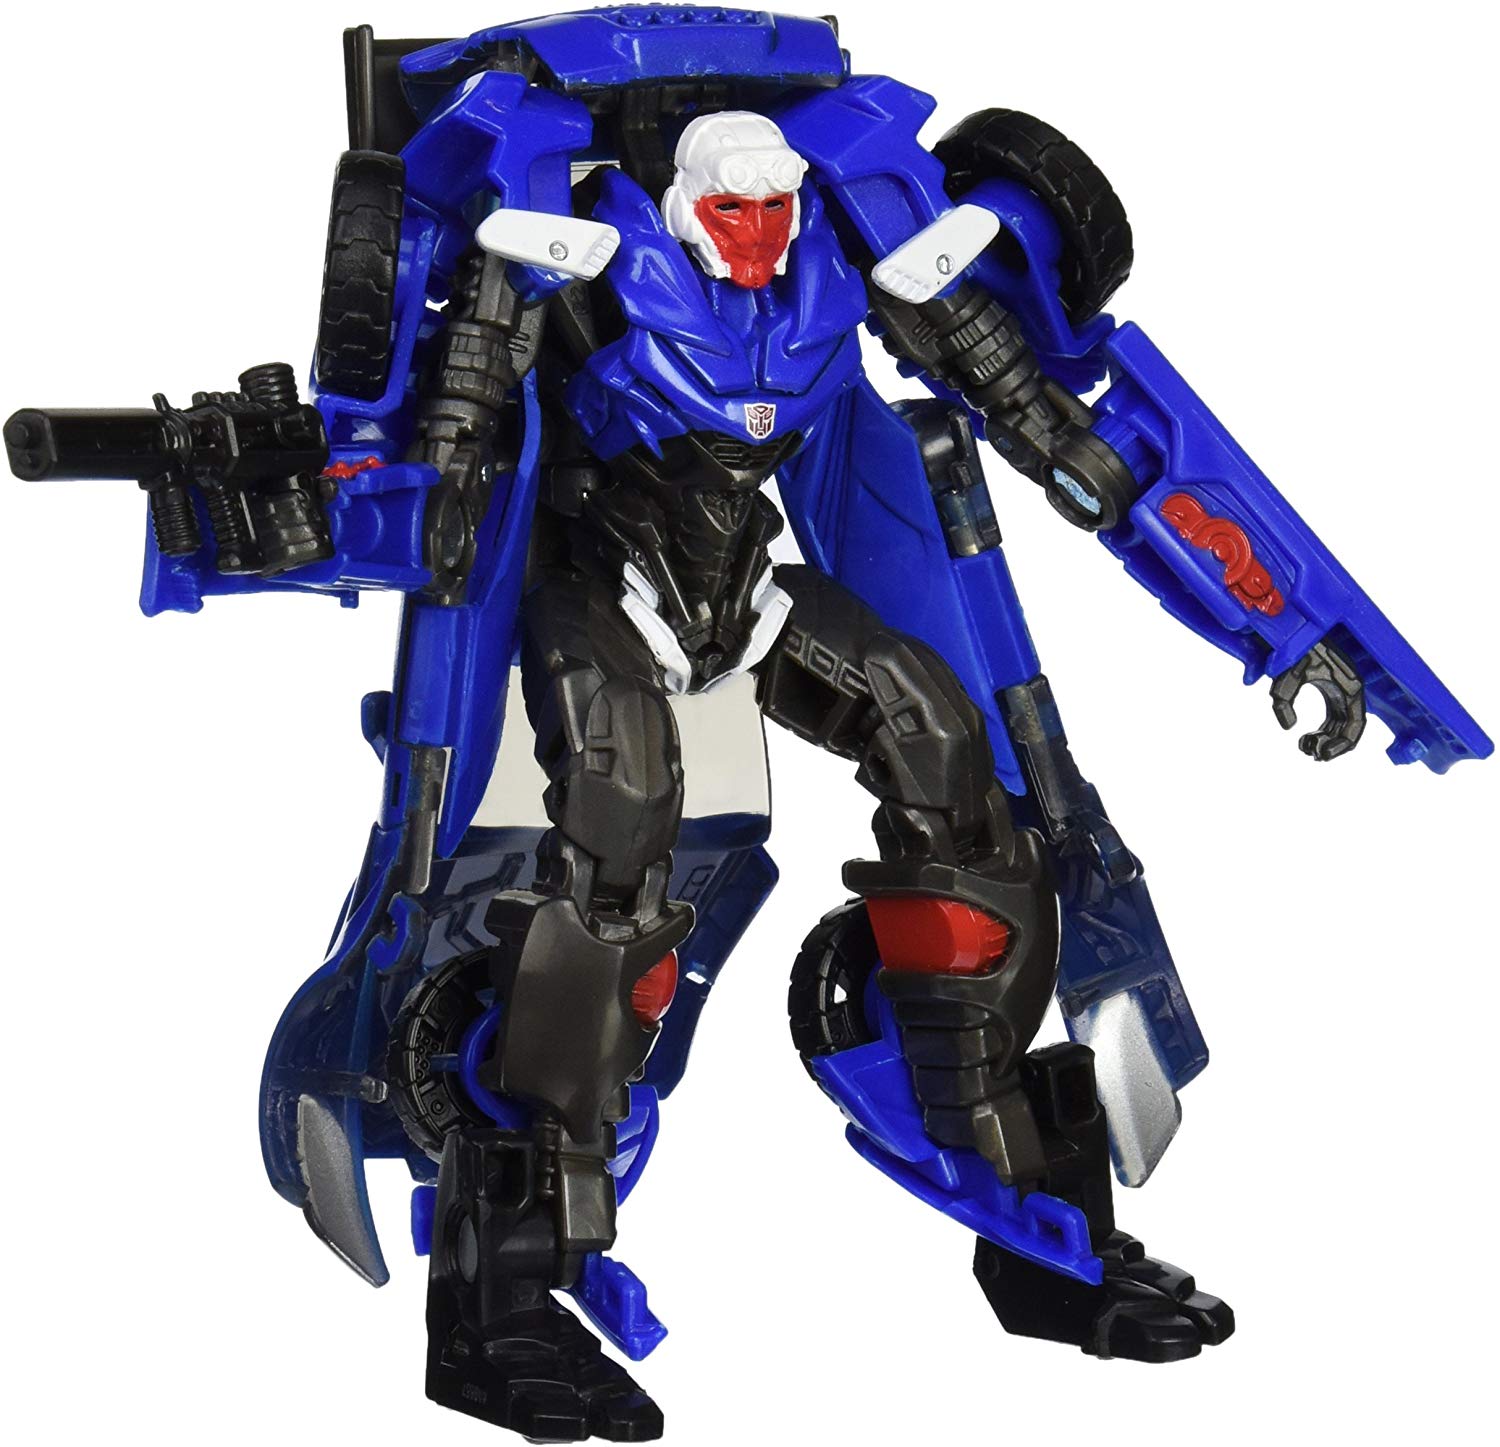 Transformers 4 Generations Age of Extinction Hot Shot Action Figure 2